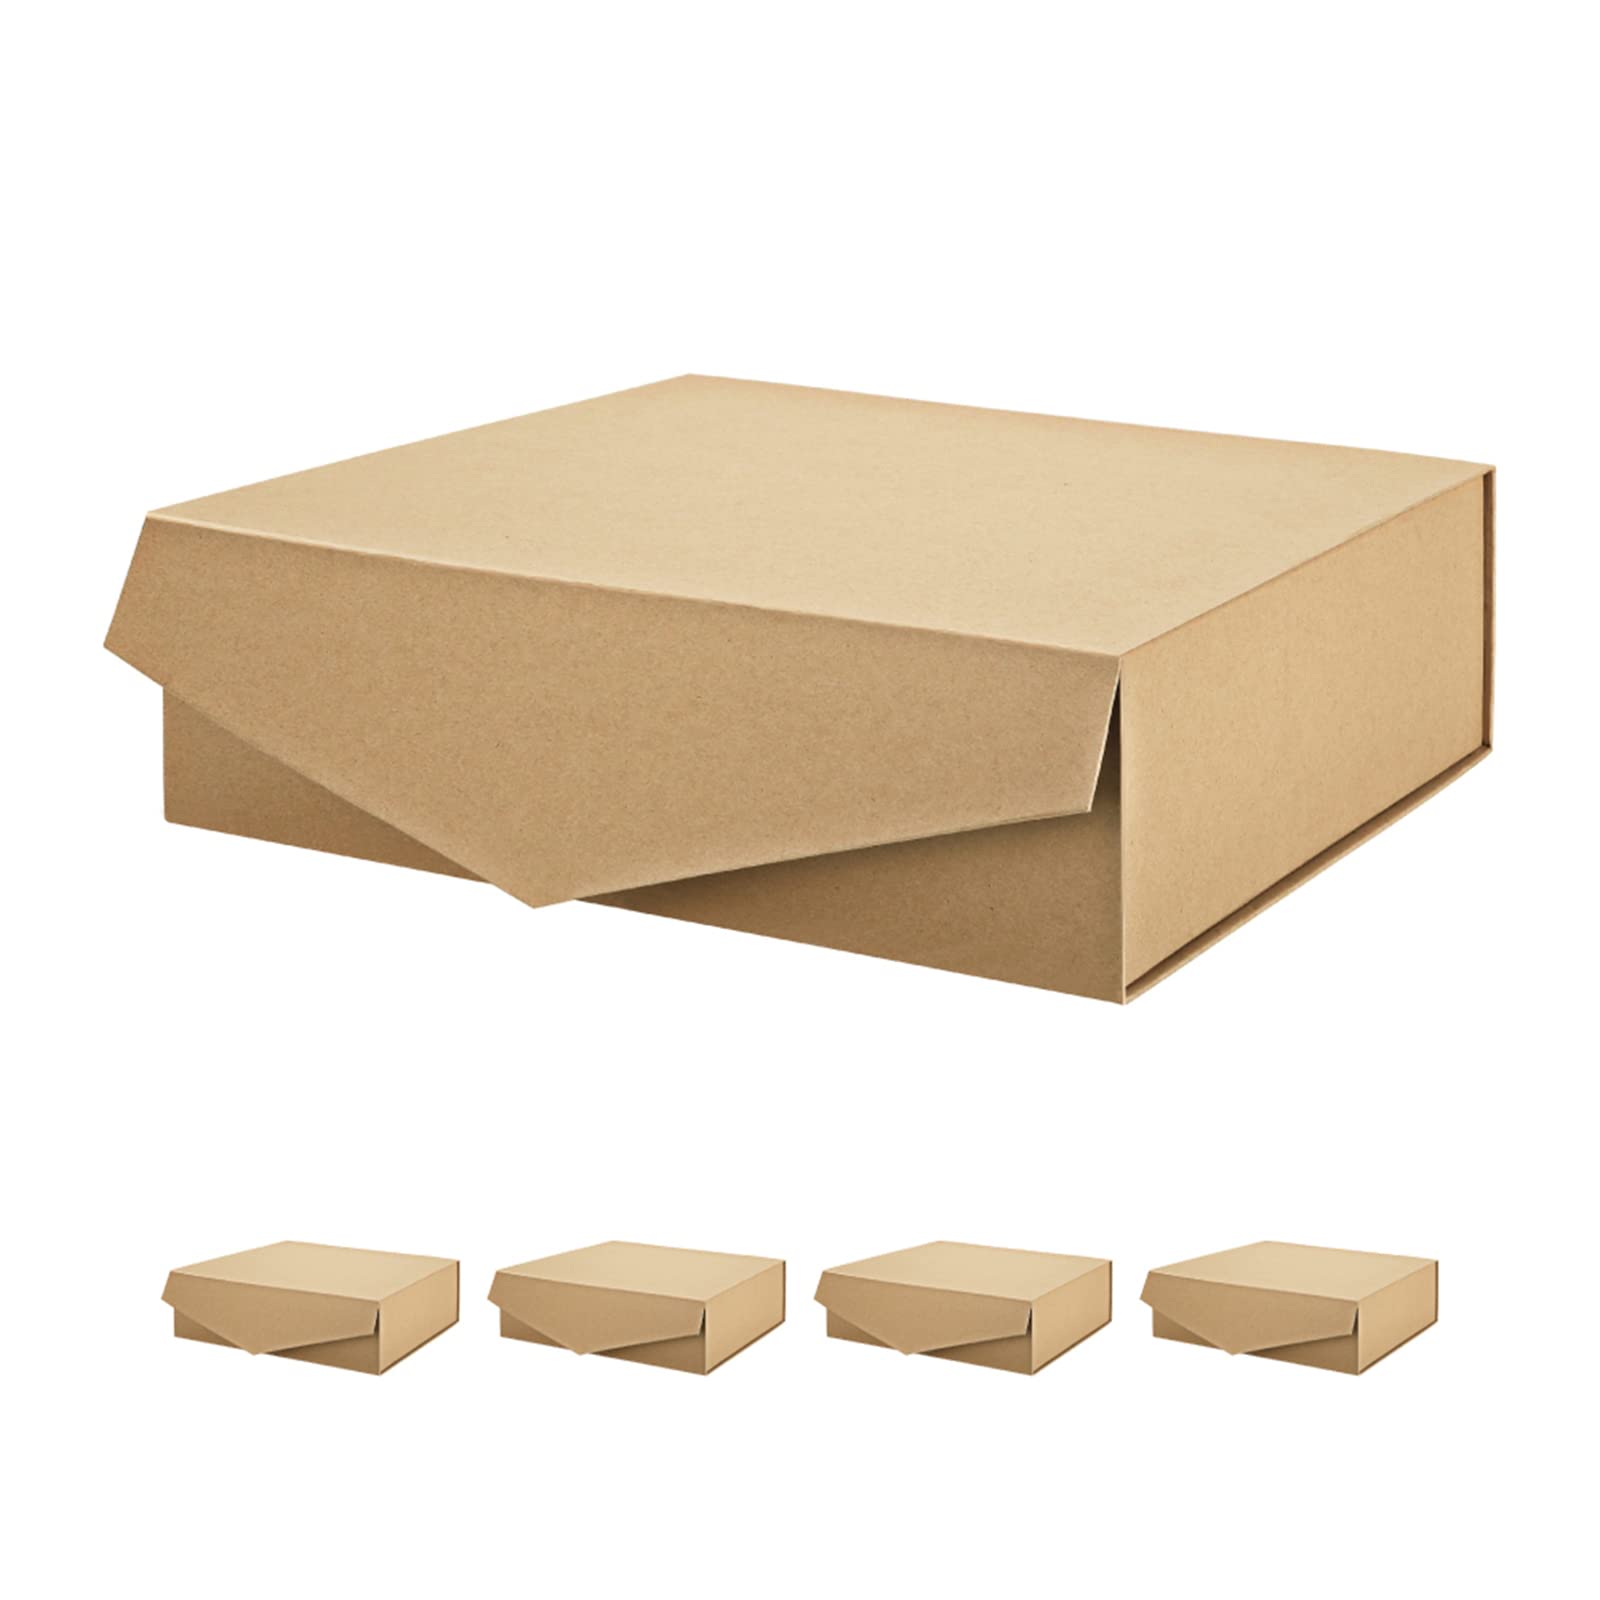 PACKHOME 5 Gift Boxes 13.5x9x4.1 Inches, Large Gift Boxes with